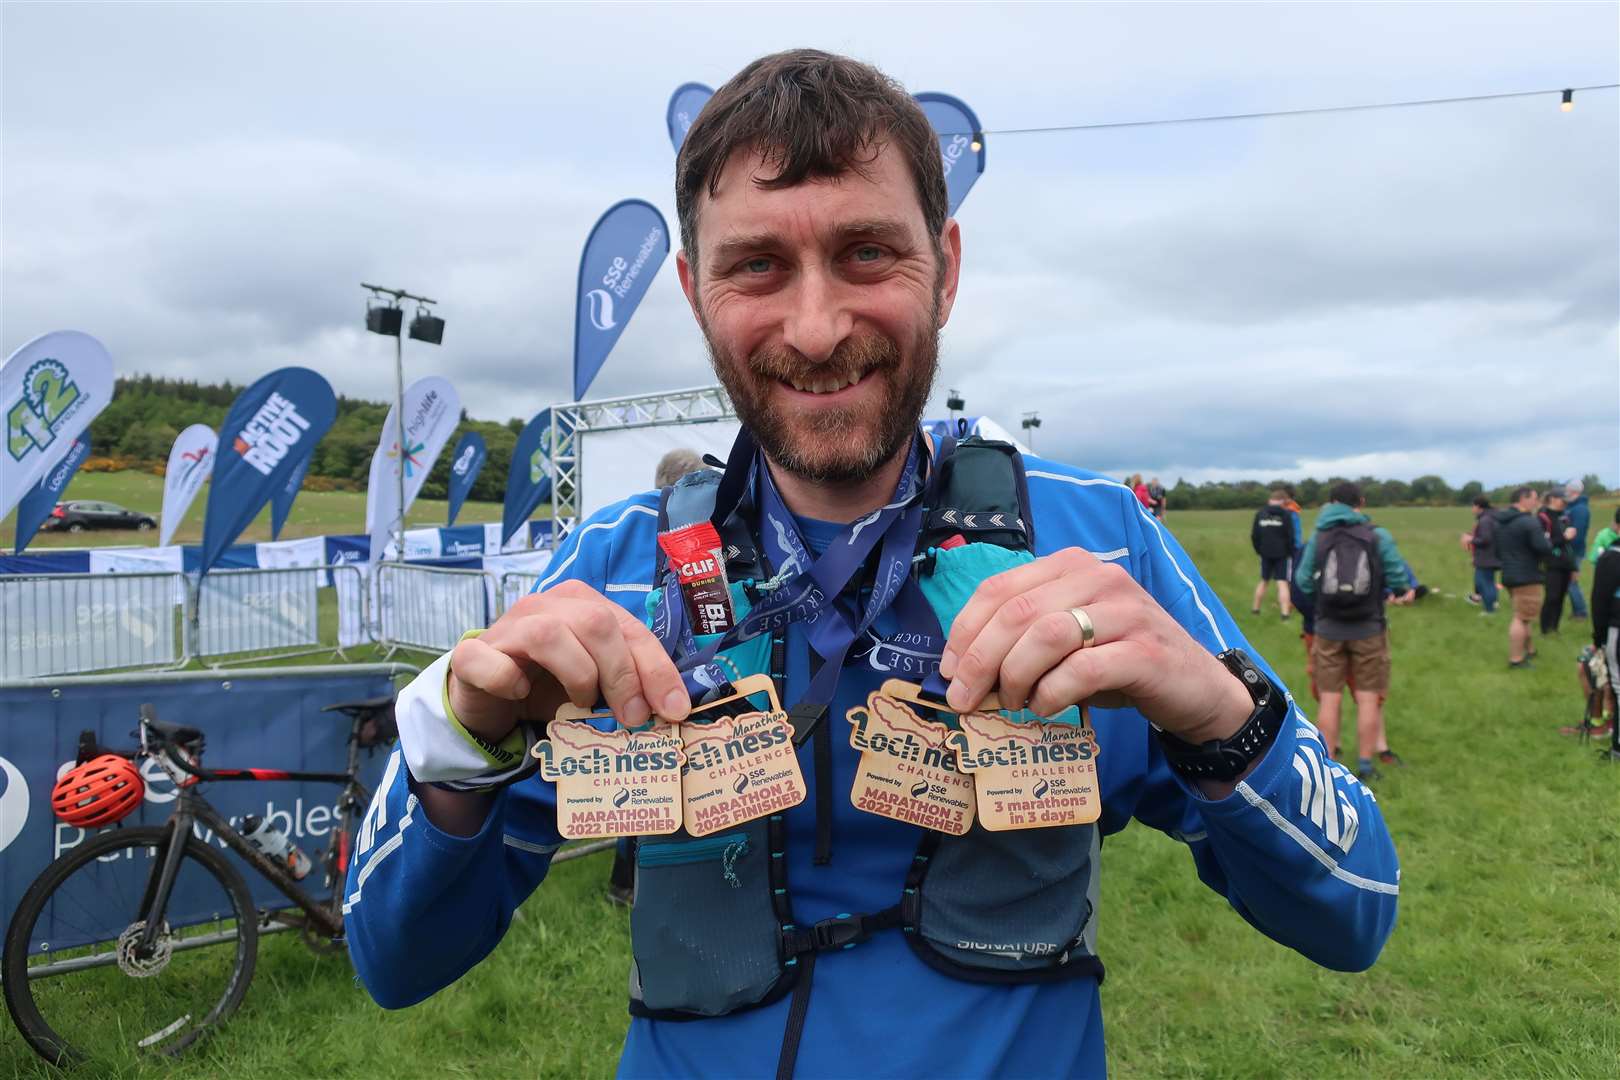 John holds his four medals - one for each marathon and one for completing all three - at the even hub in Dores.